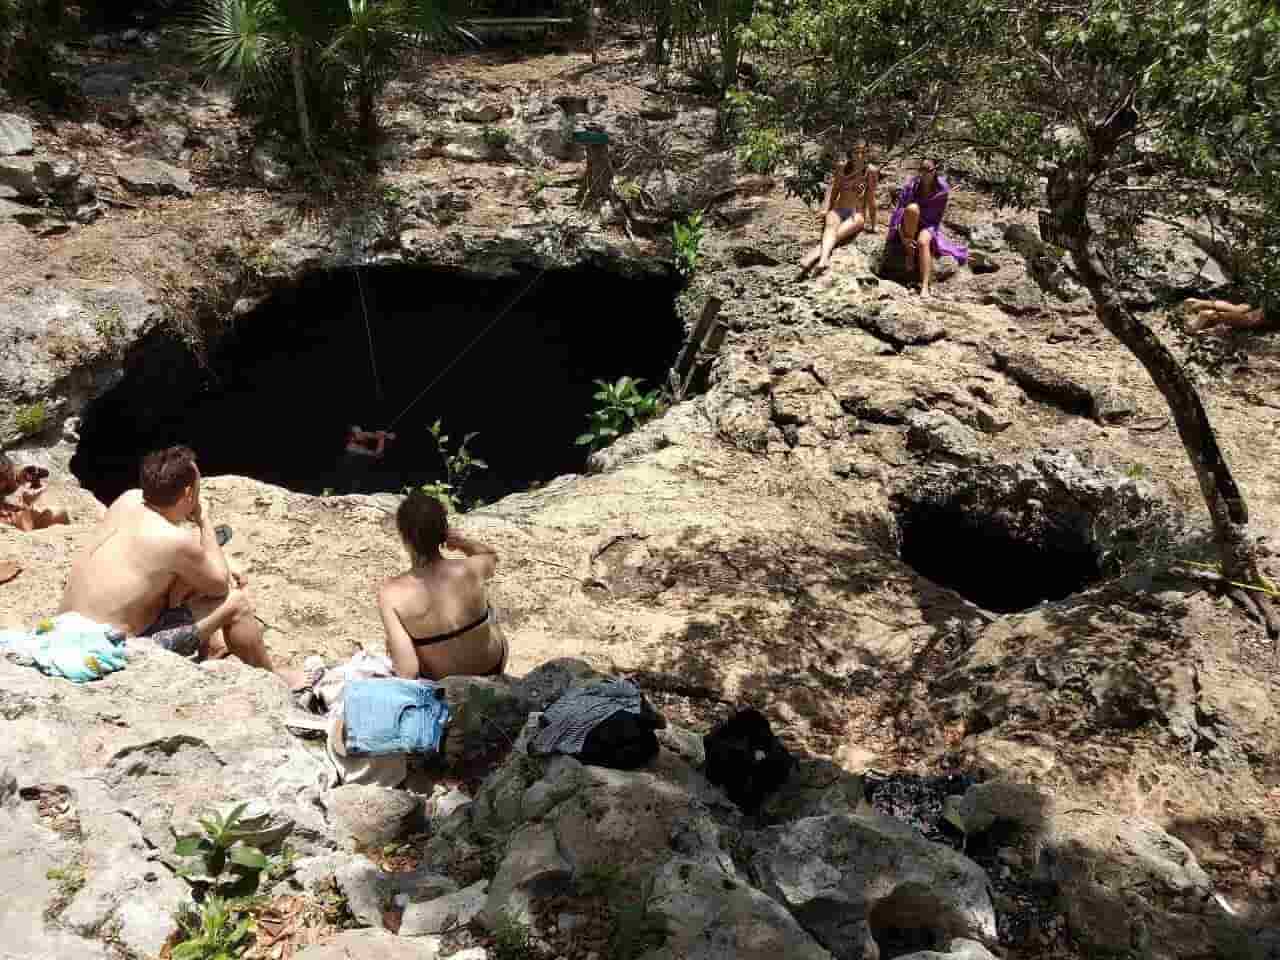 Early in the morning at Cenote Calavera